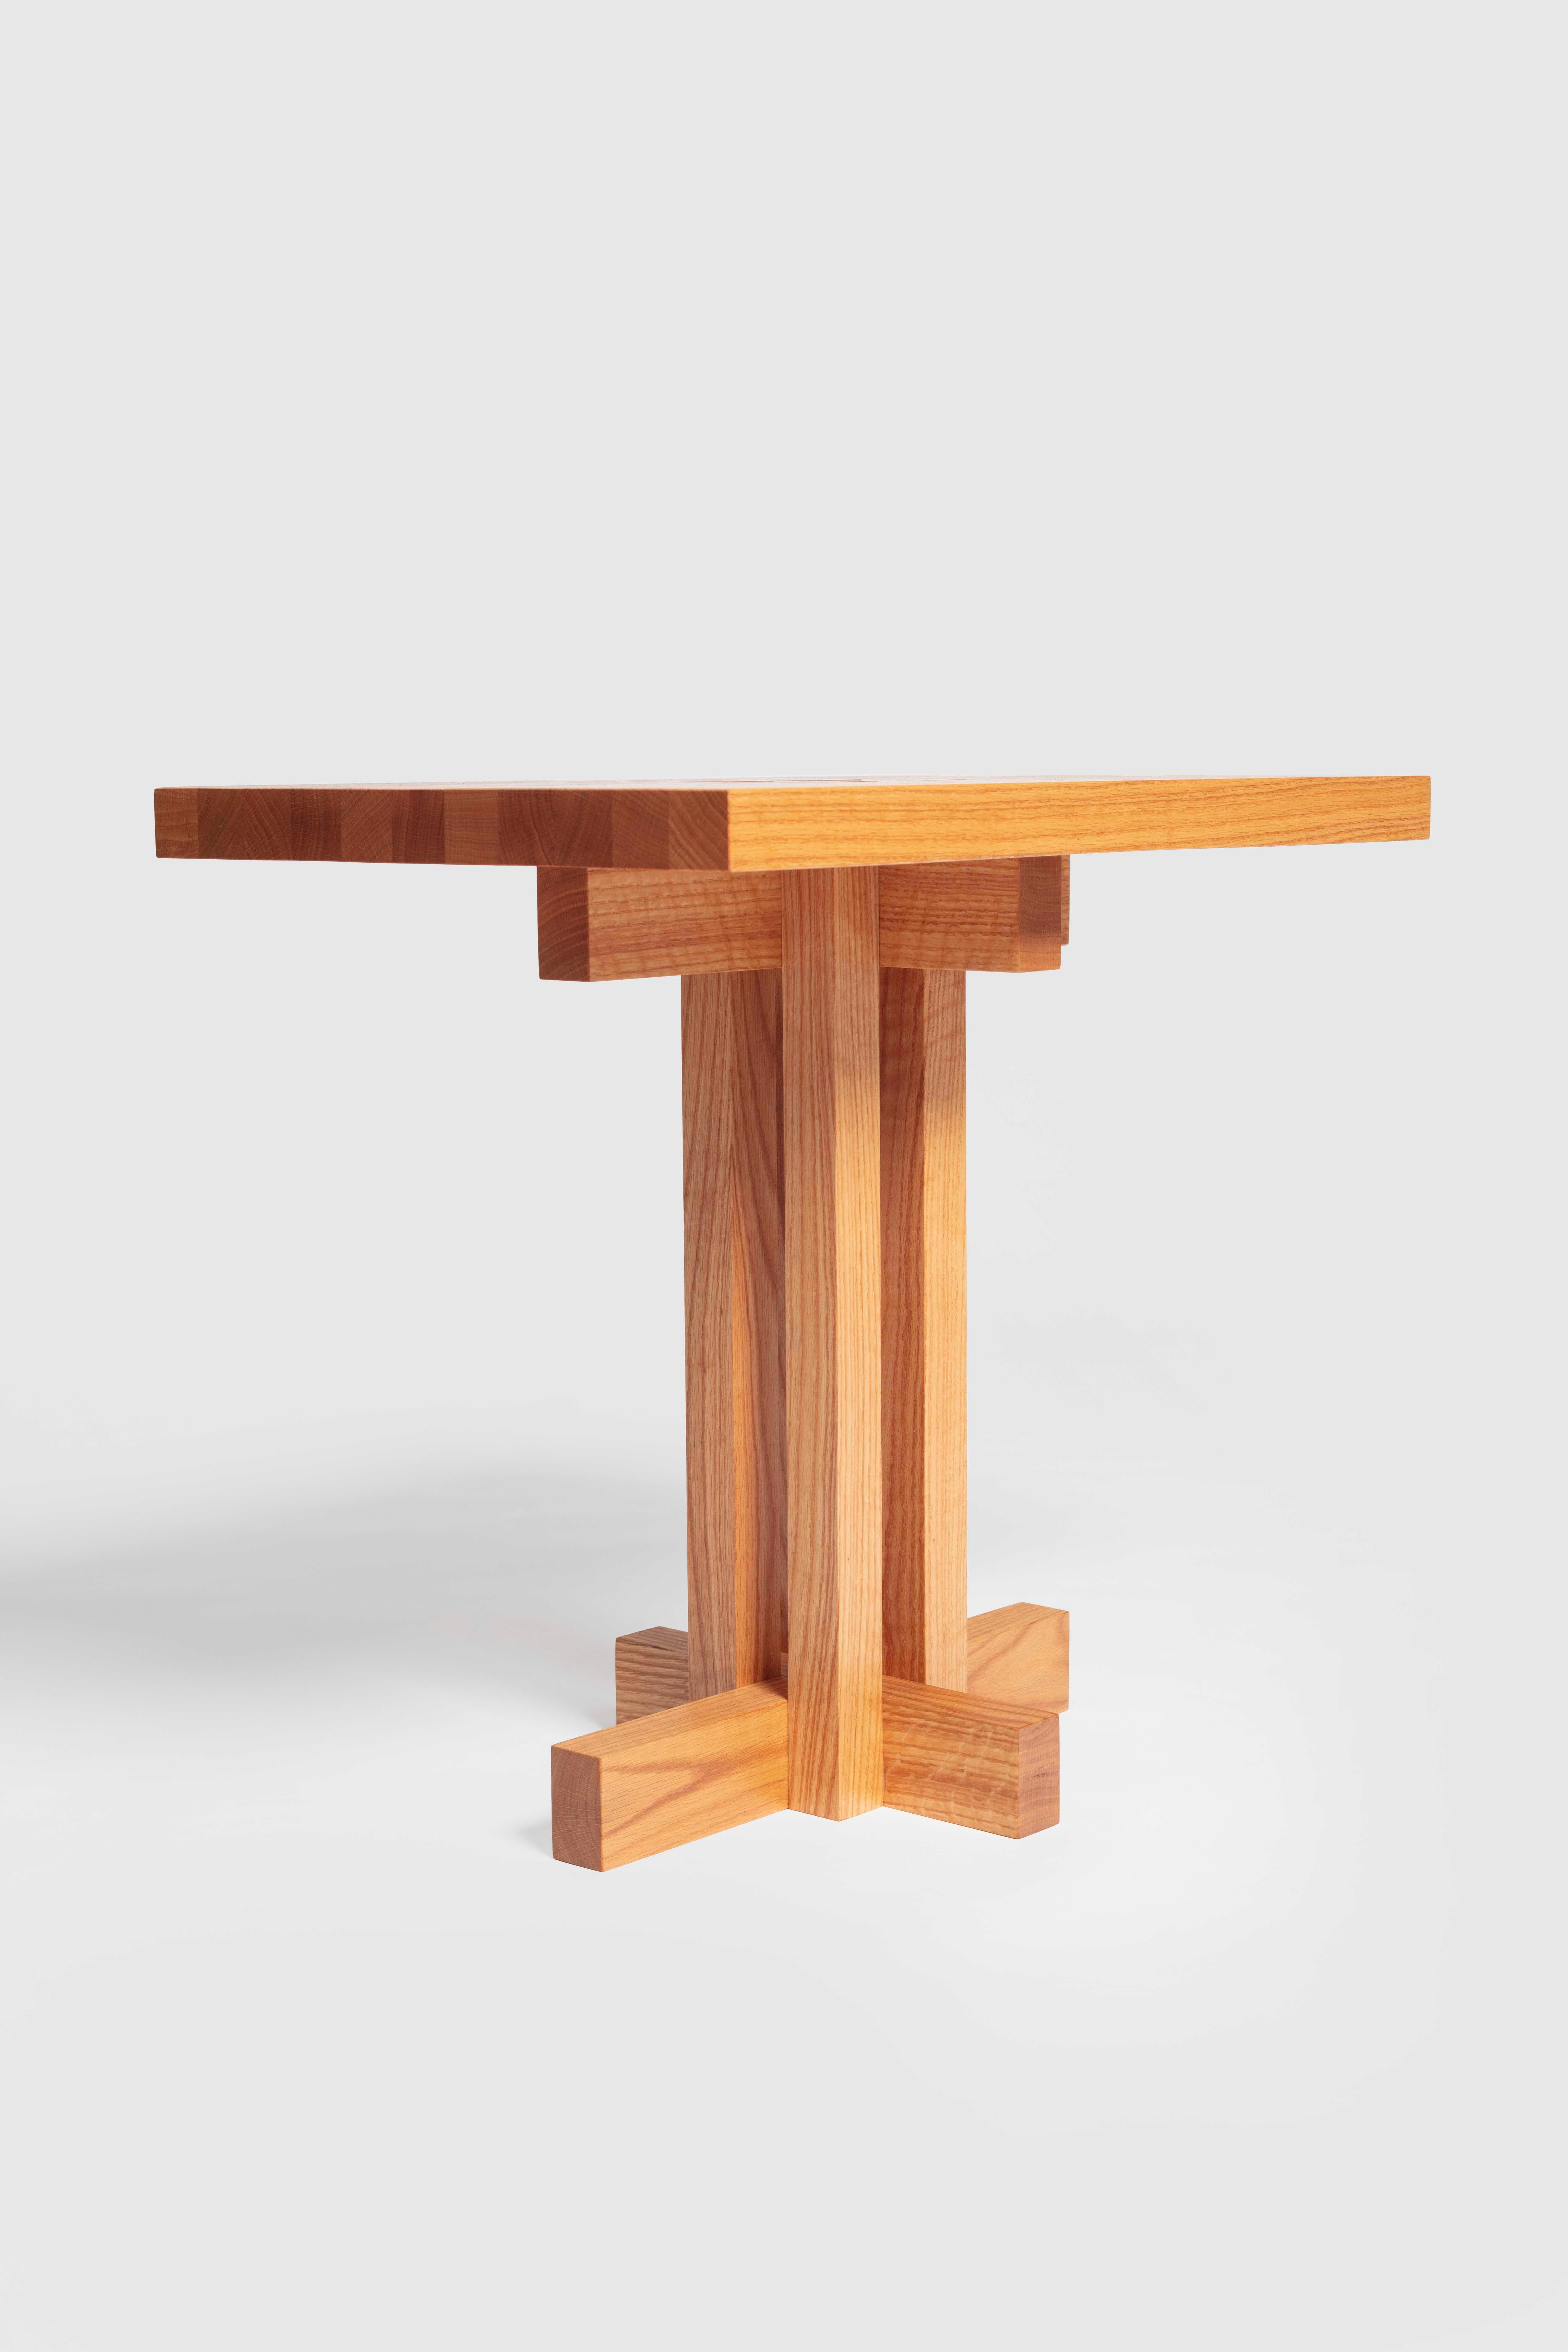 Contemporary Ray Kappe RK12 Side Table in Red Oak by Original in Berlin, Germany, 2020 For Sale